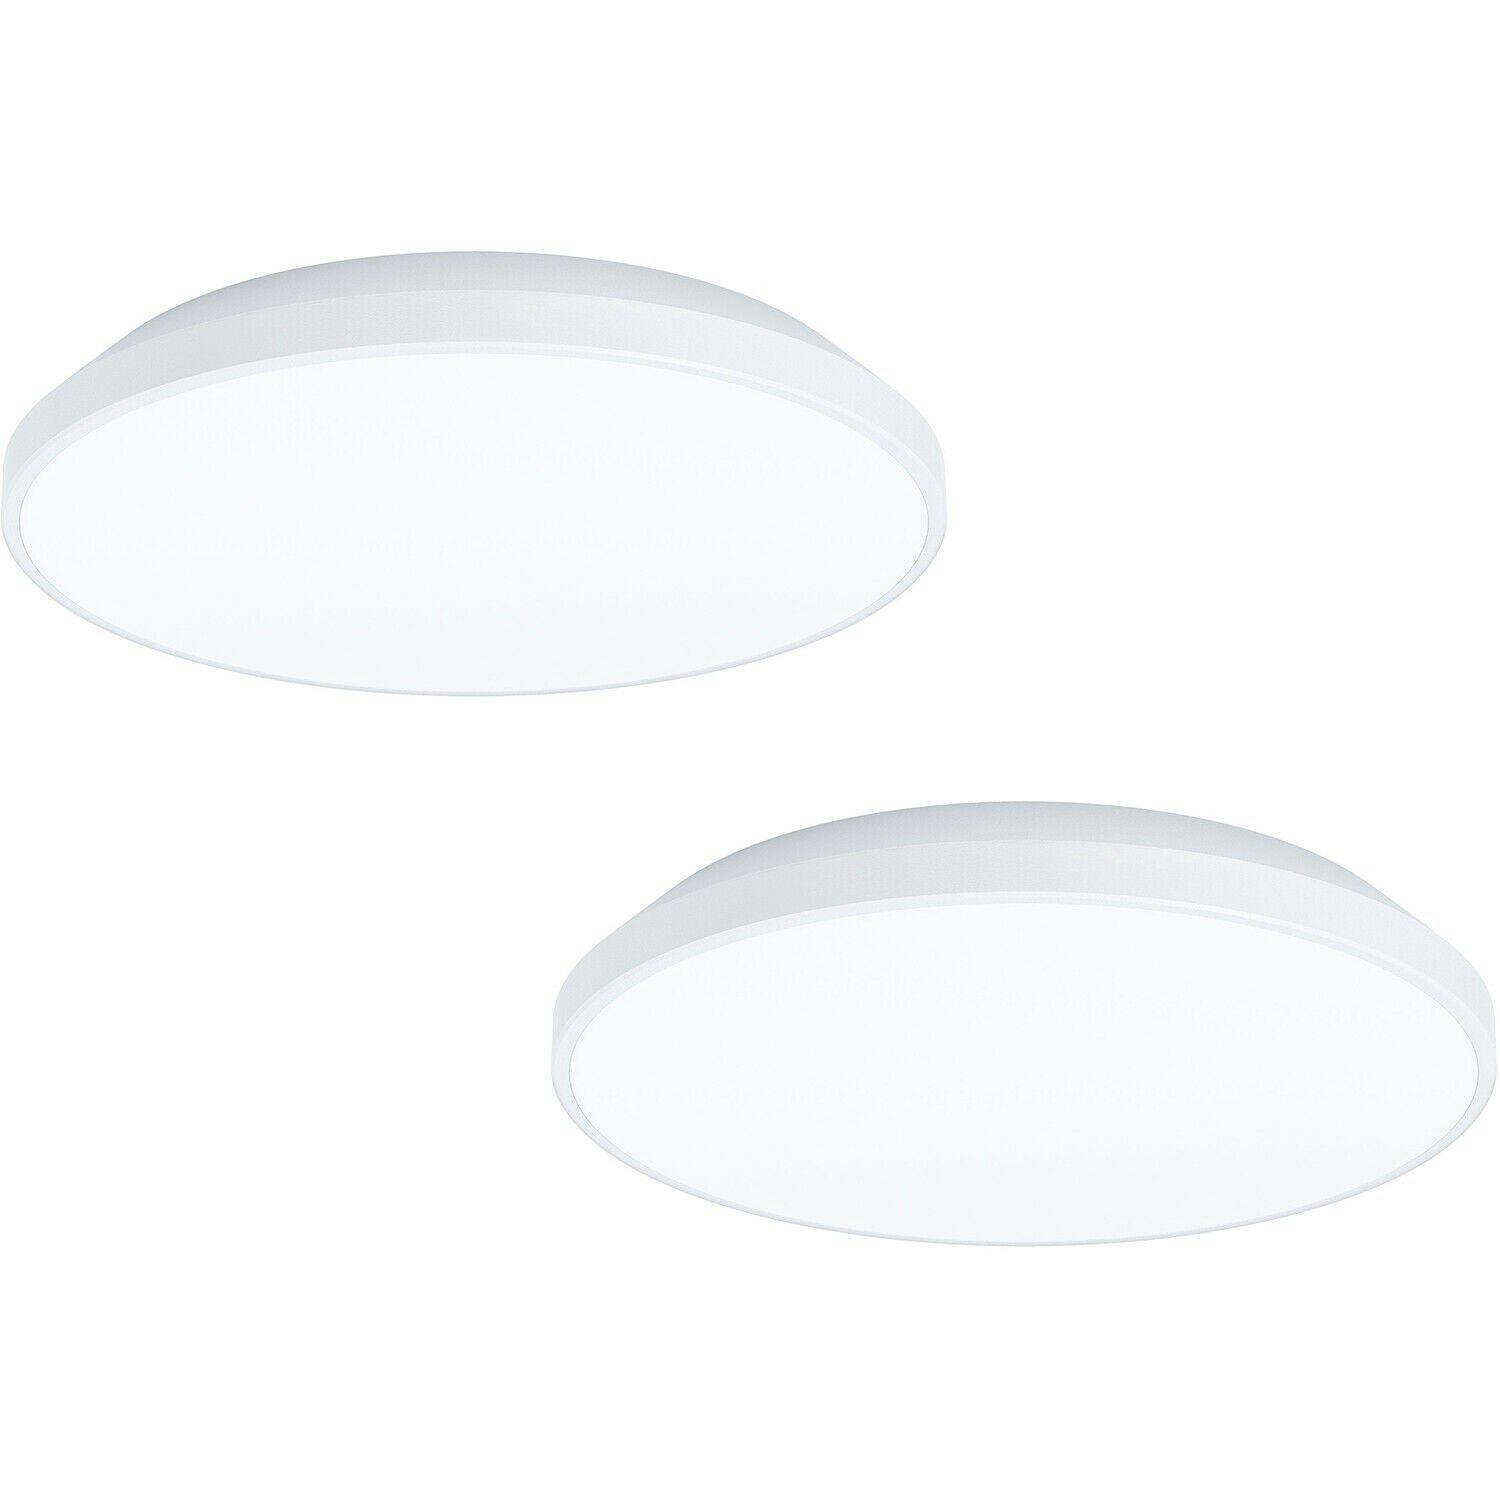 2 PACK Wall / Ceiling Light White Round Surface Moutned 240mm 16W LED - image 1